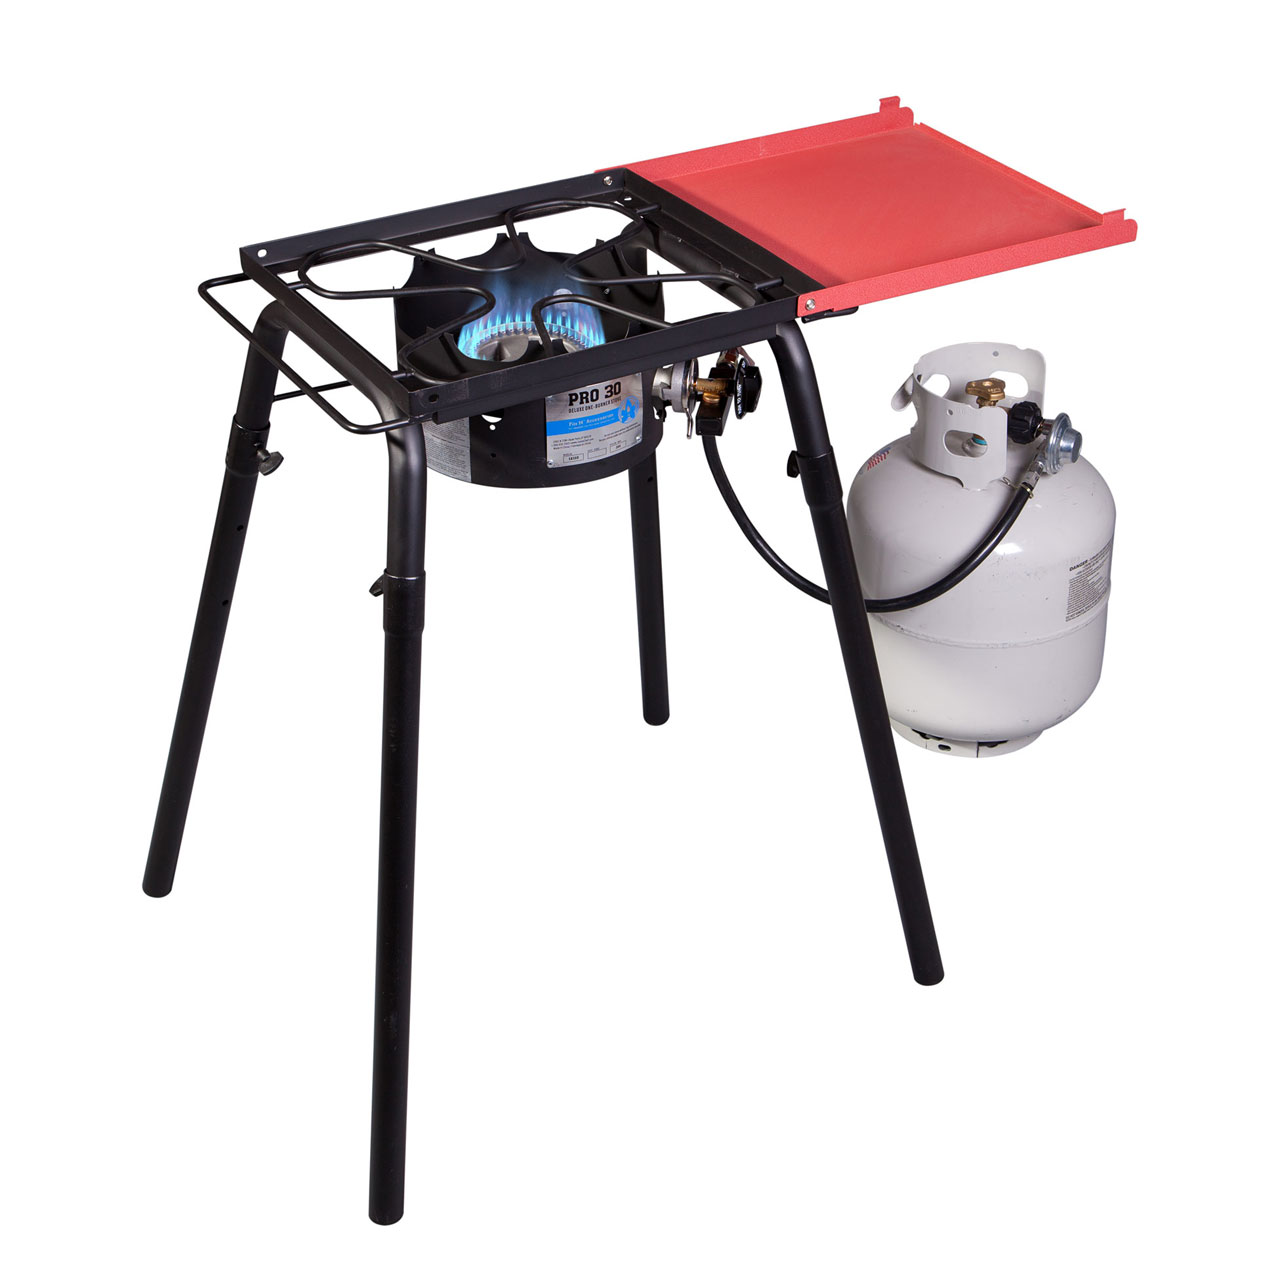 Camp Chef Pro 30 Deluxe Stove 50mb